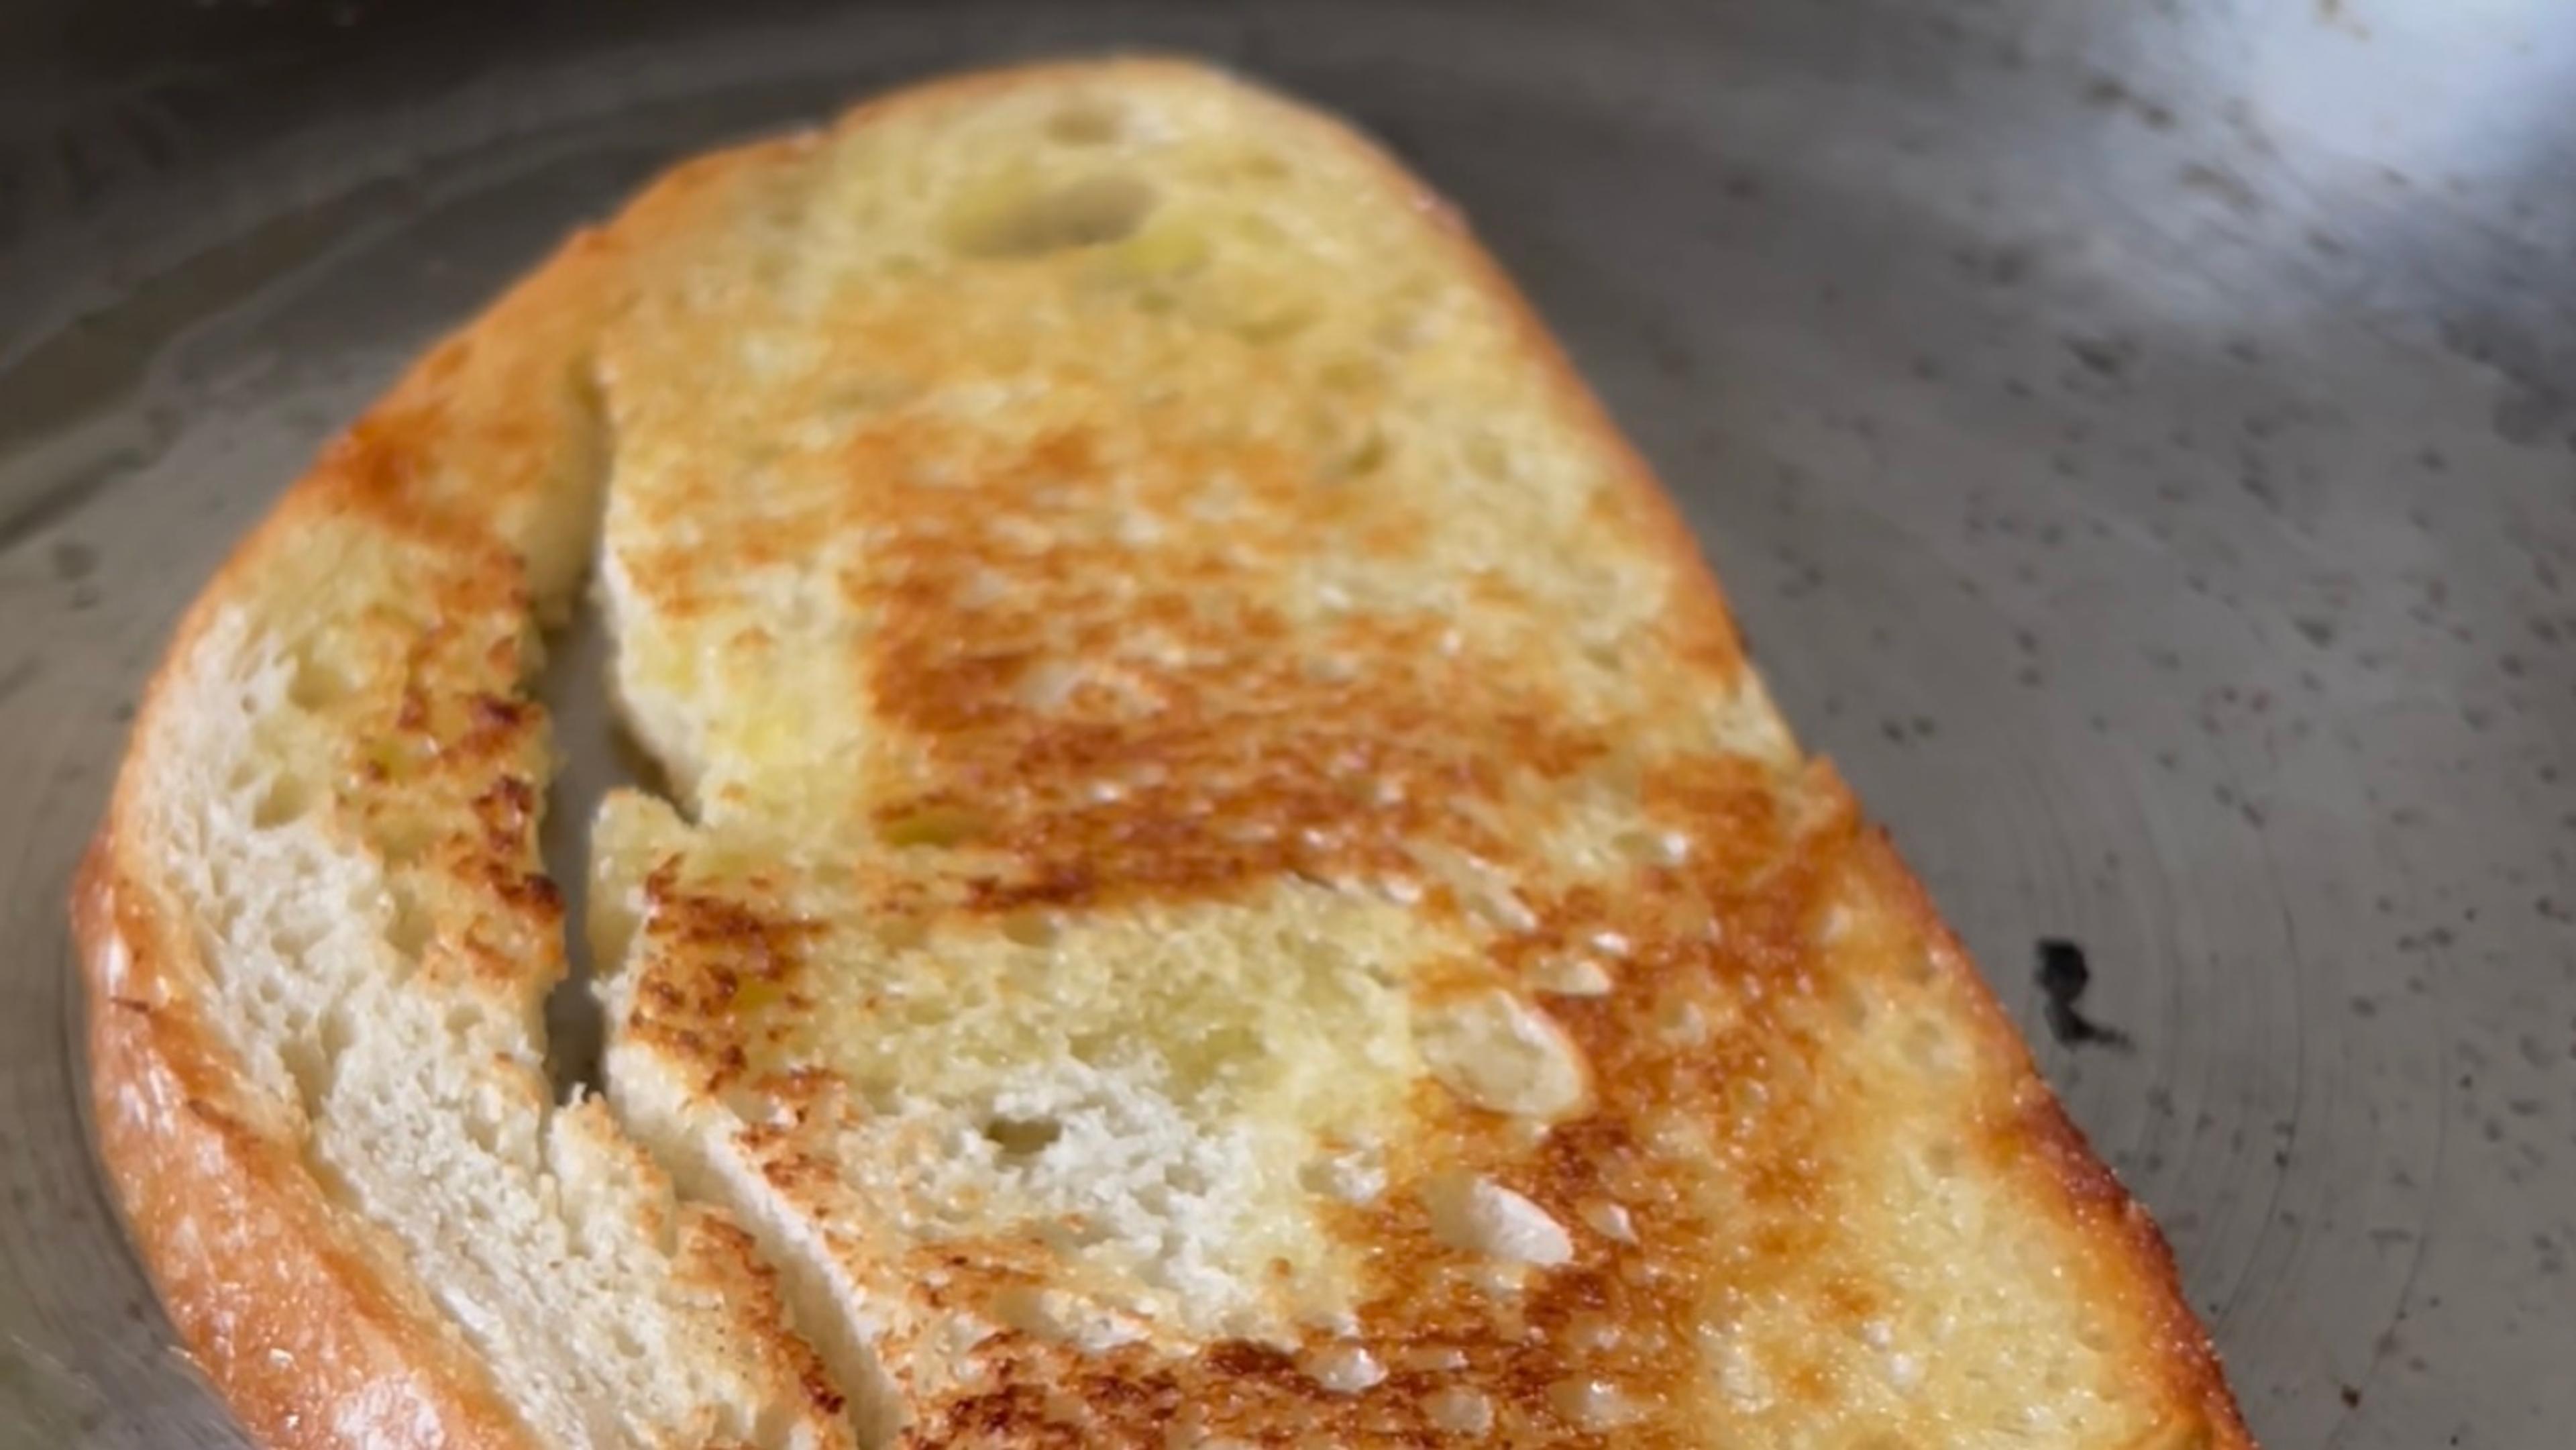 Sourdough bread toasting in a pan with oil.